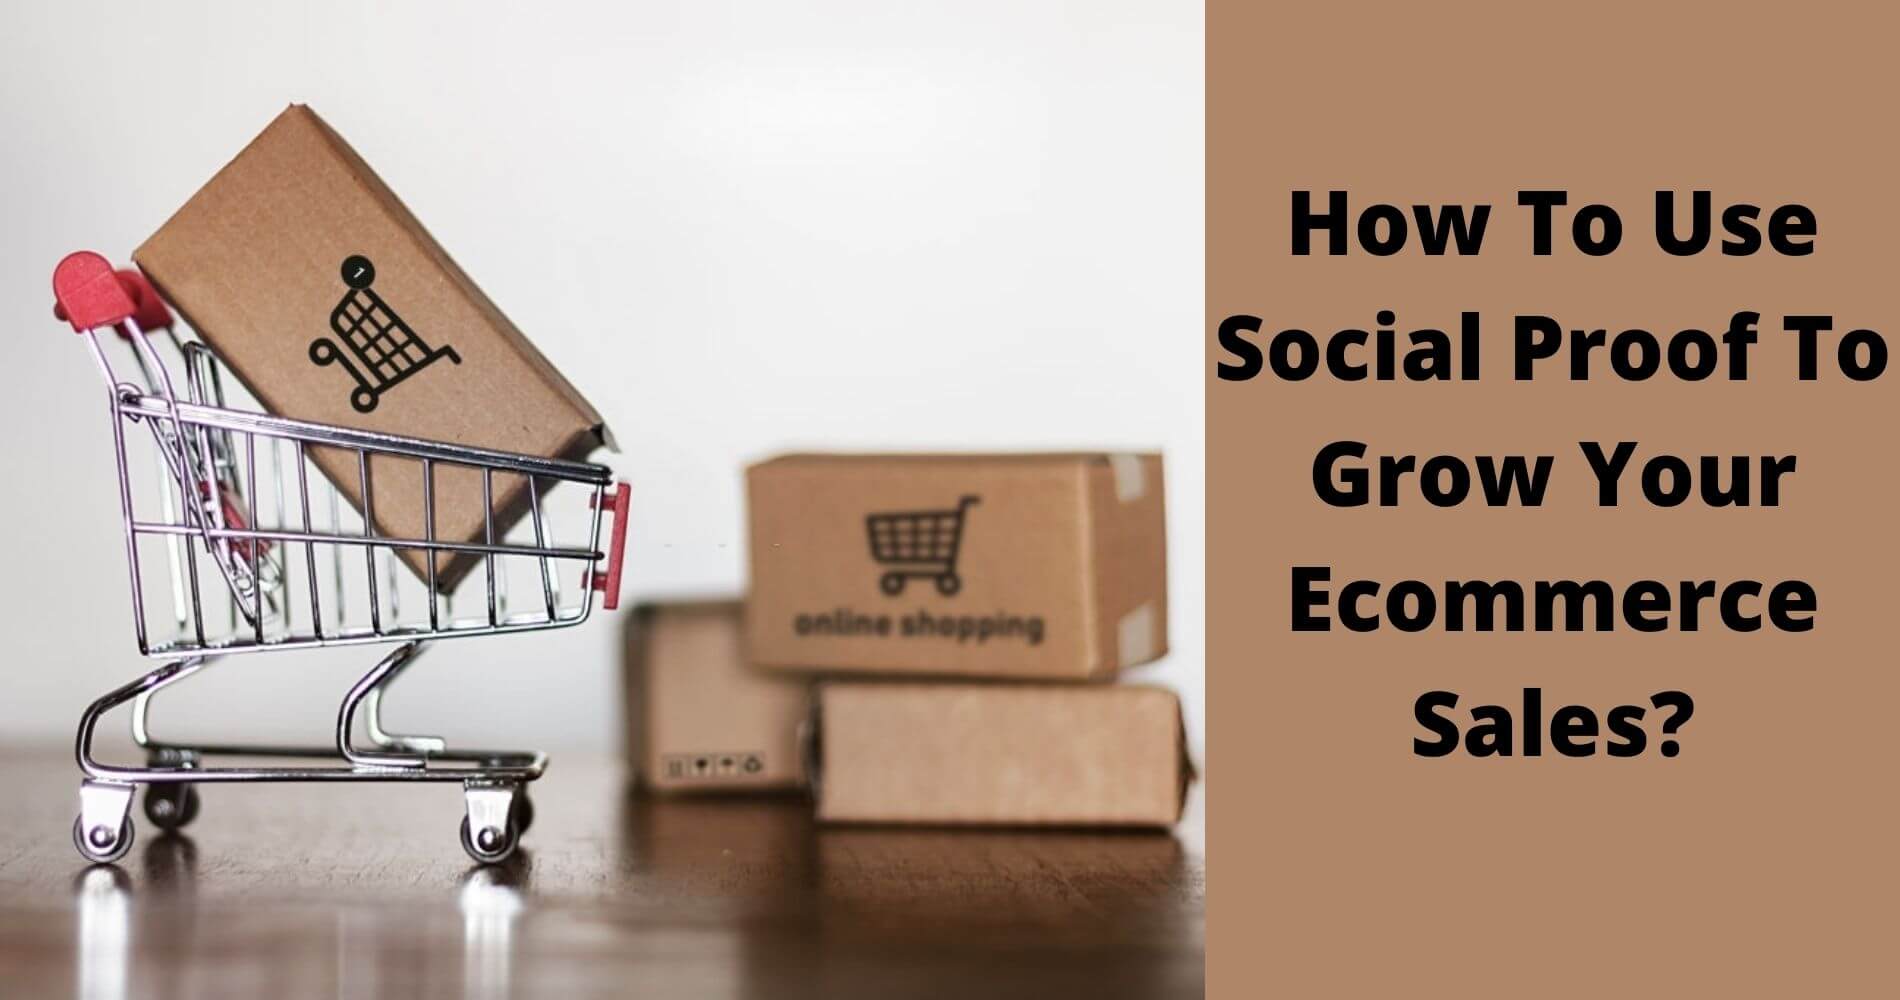 How To Use Social Proof To Grow Your Ecommerce Sales!